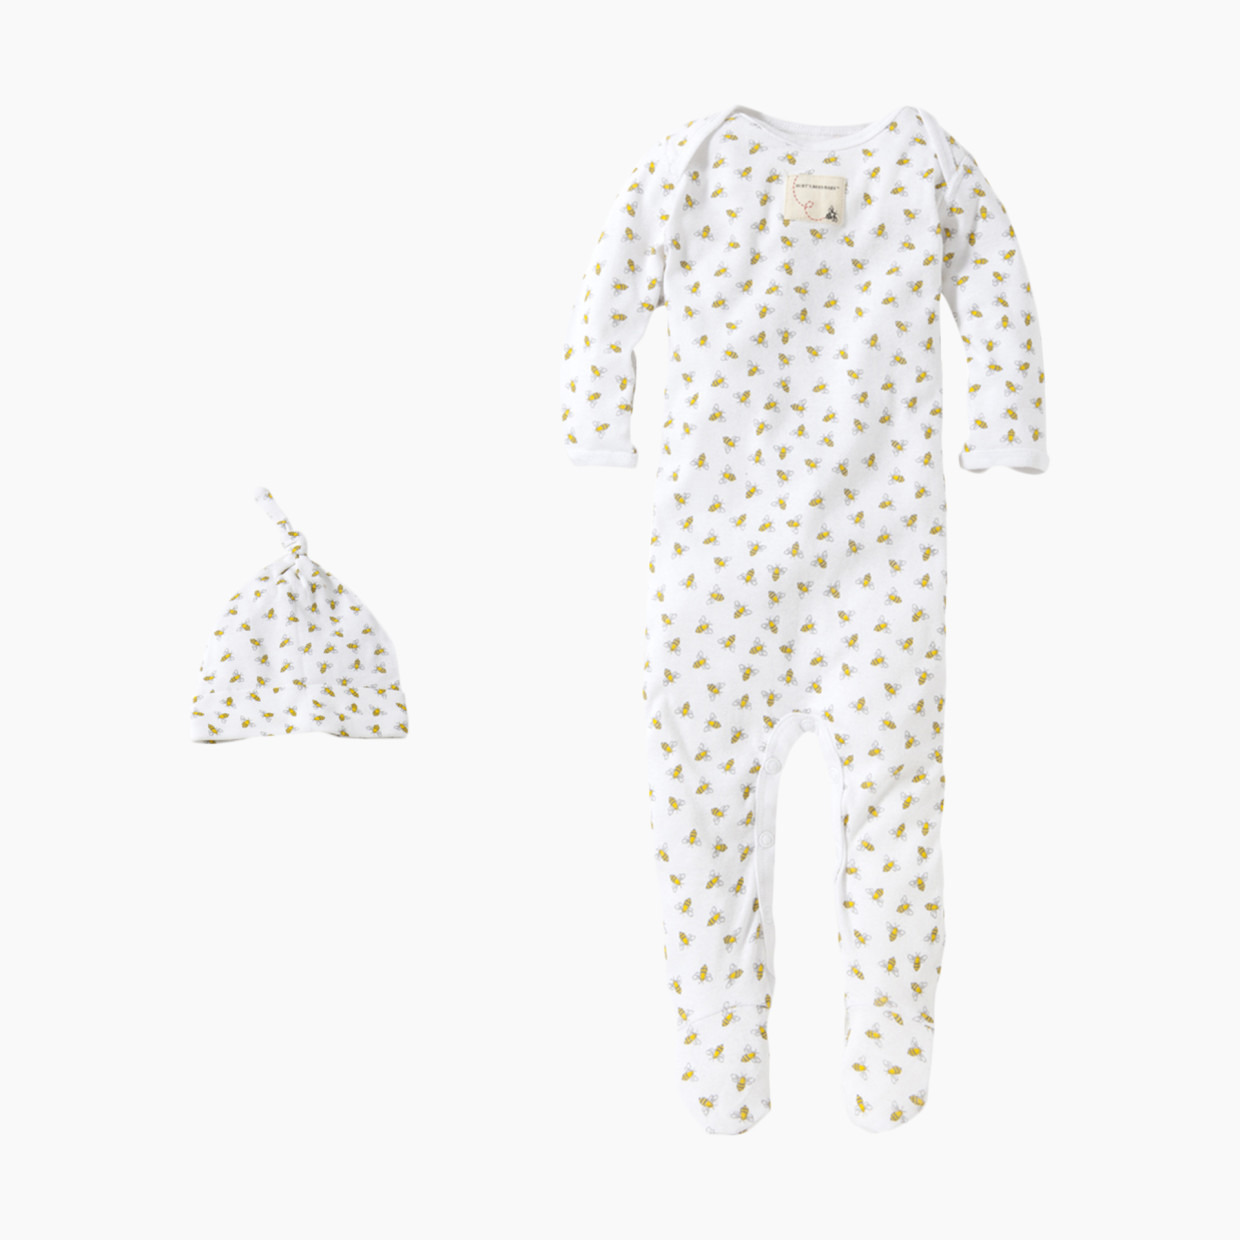 Burt's Bees Baby Organic Footed Coverall & Knot Top Hat - Cloud Honeybee, 0-3 Months.